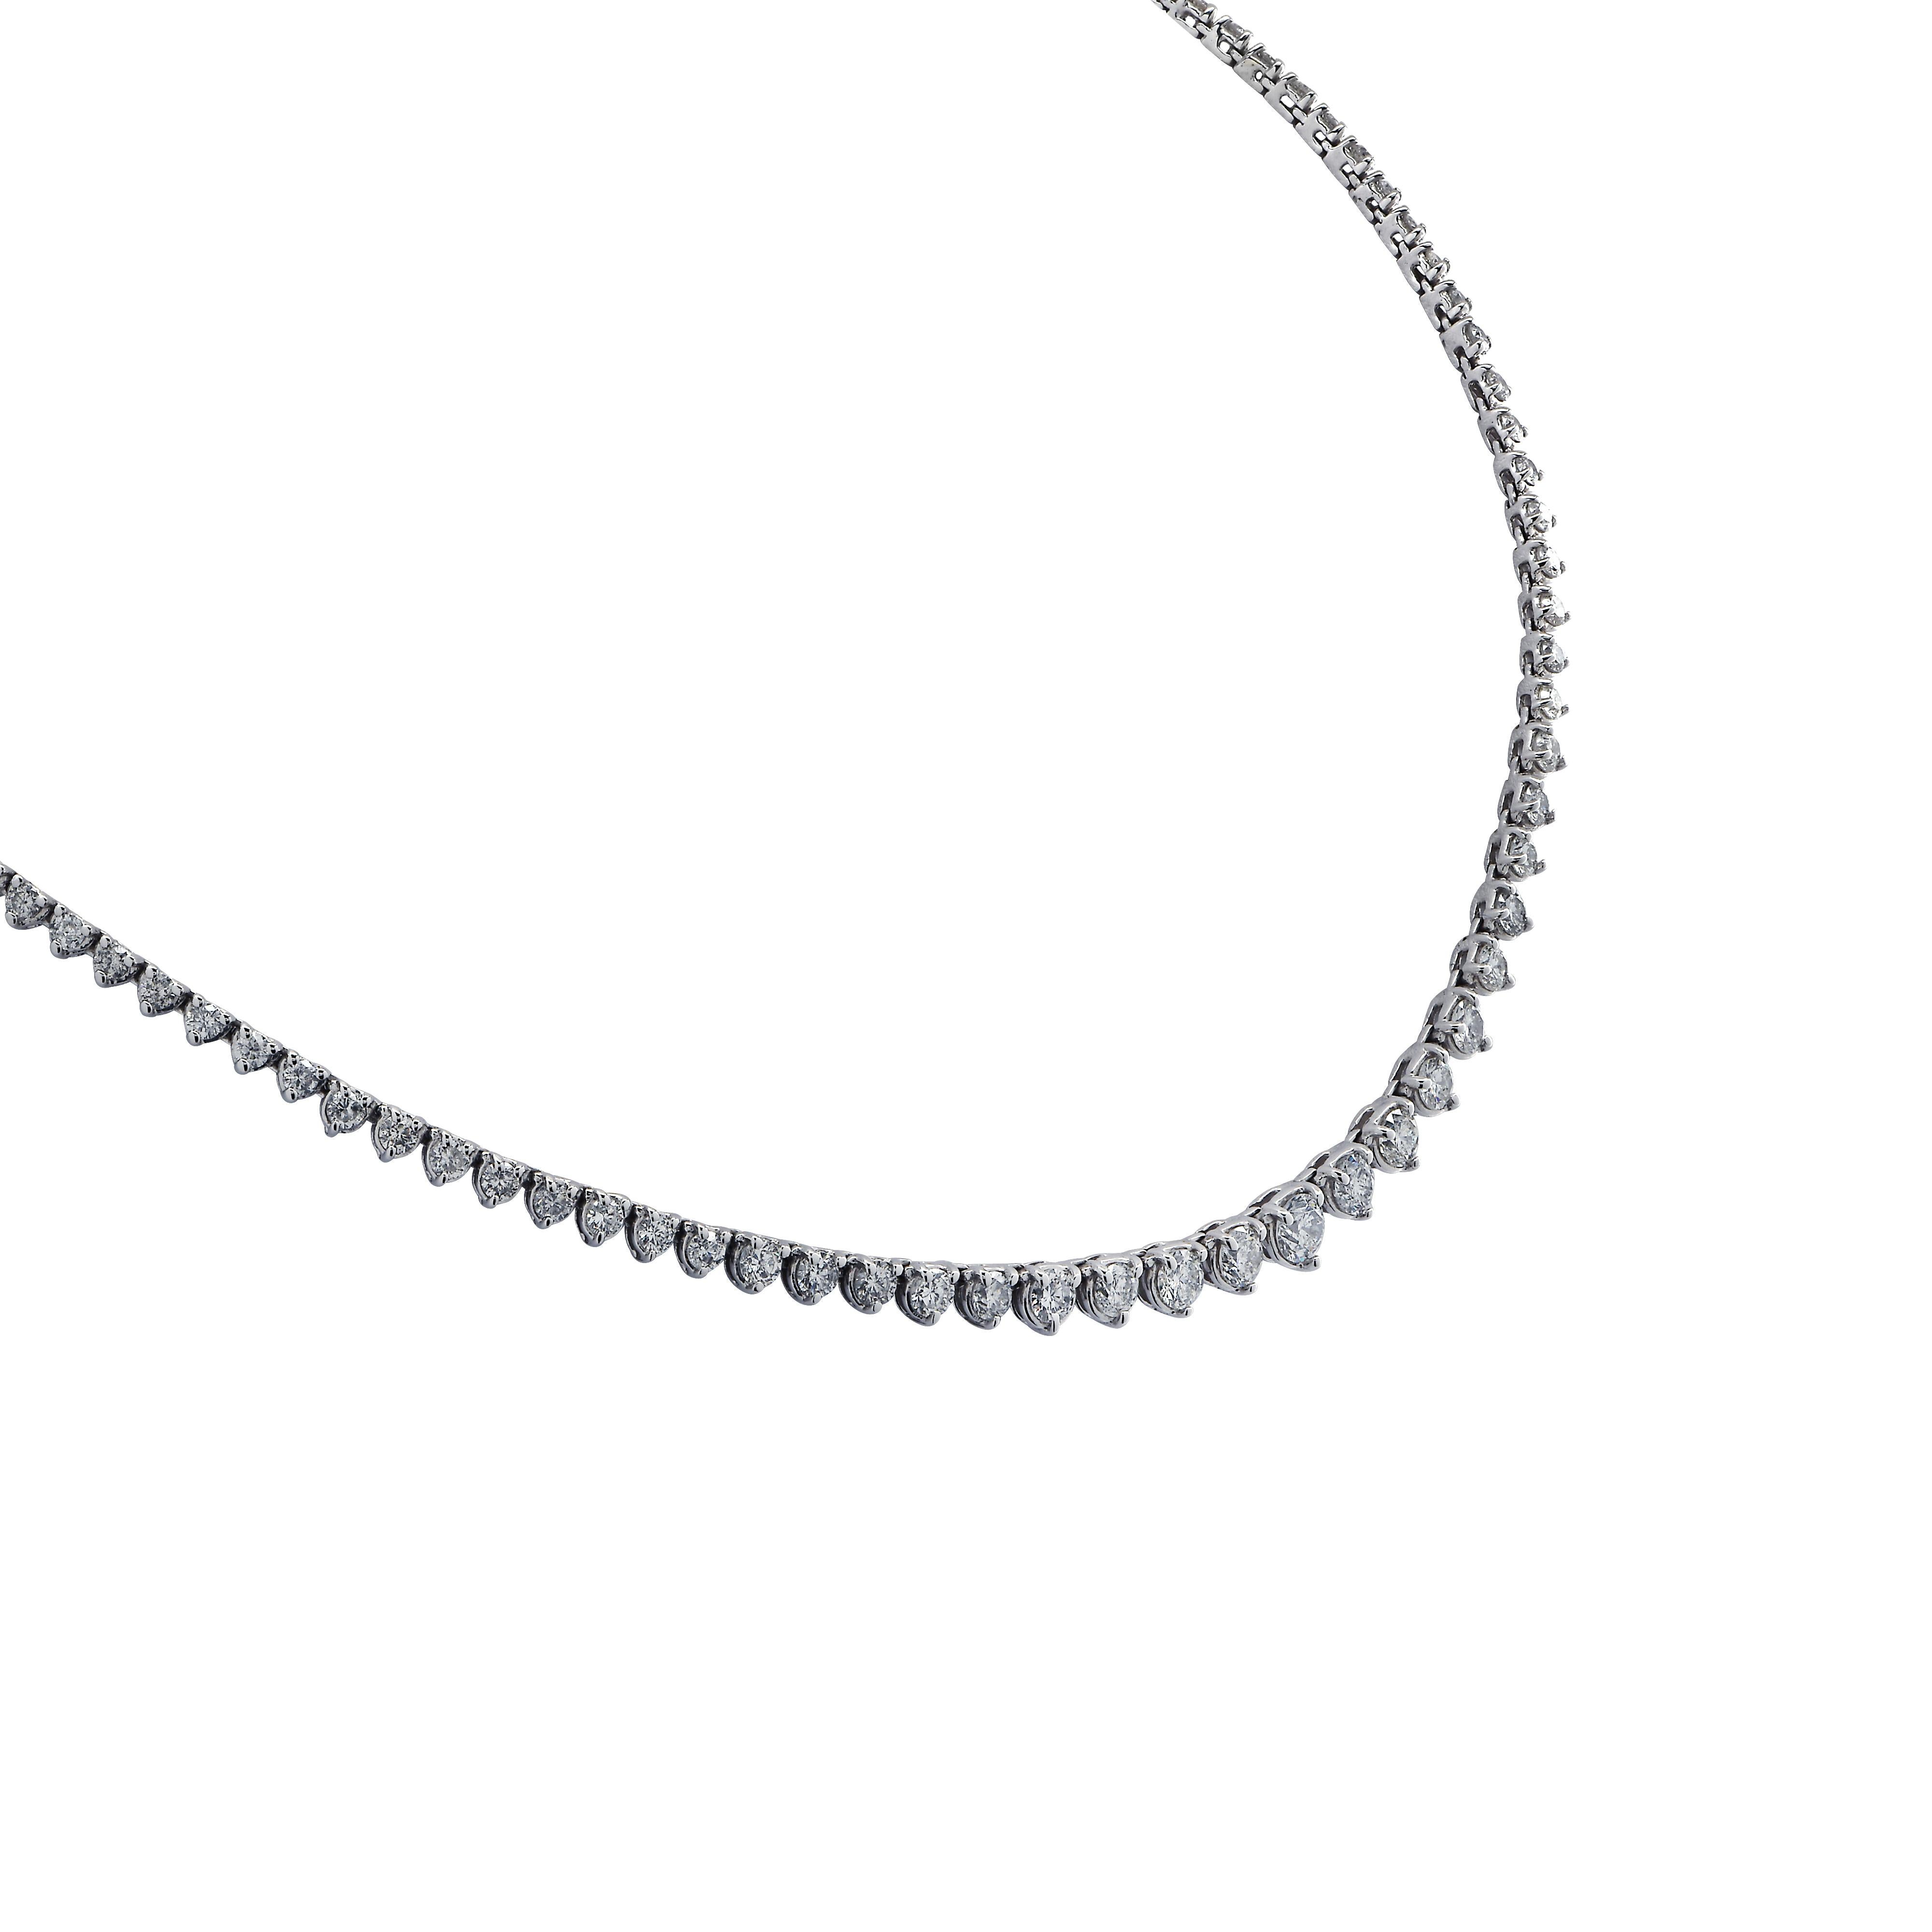 Exquisite graduated riviere diamond necklace crafted in white gold, showcasing 114 round brilliant cut diamonds weighing approximately 8.50 carats total, G color, SI2-3 clarity. The diamonds are set in a seamless sea of eternity, creating a